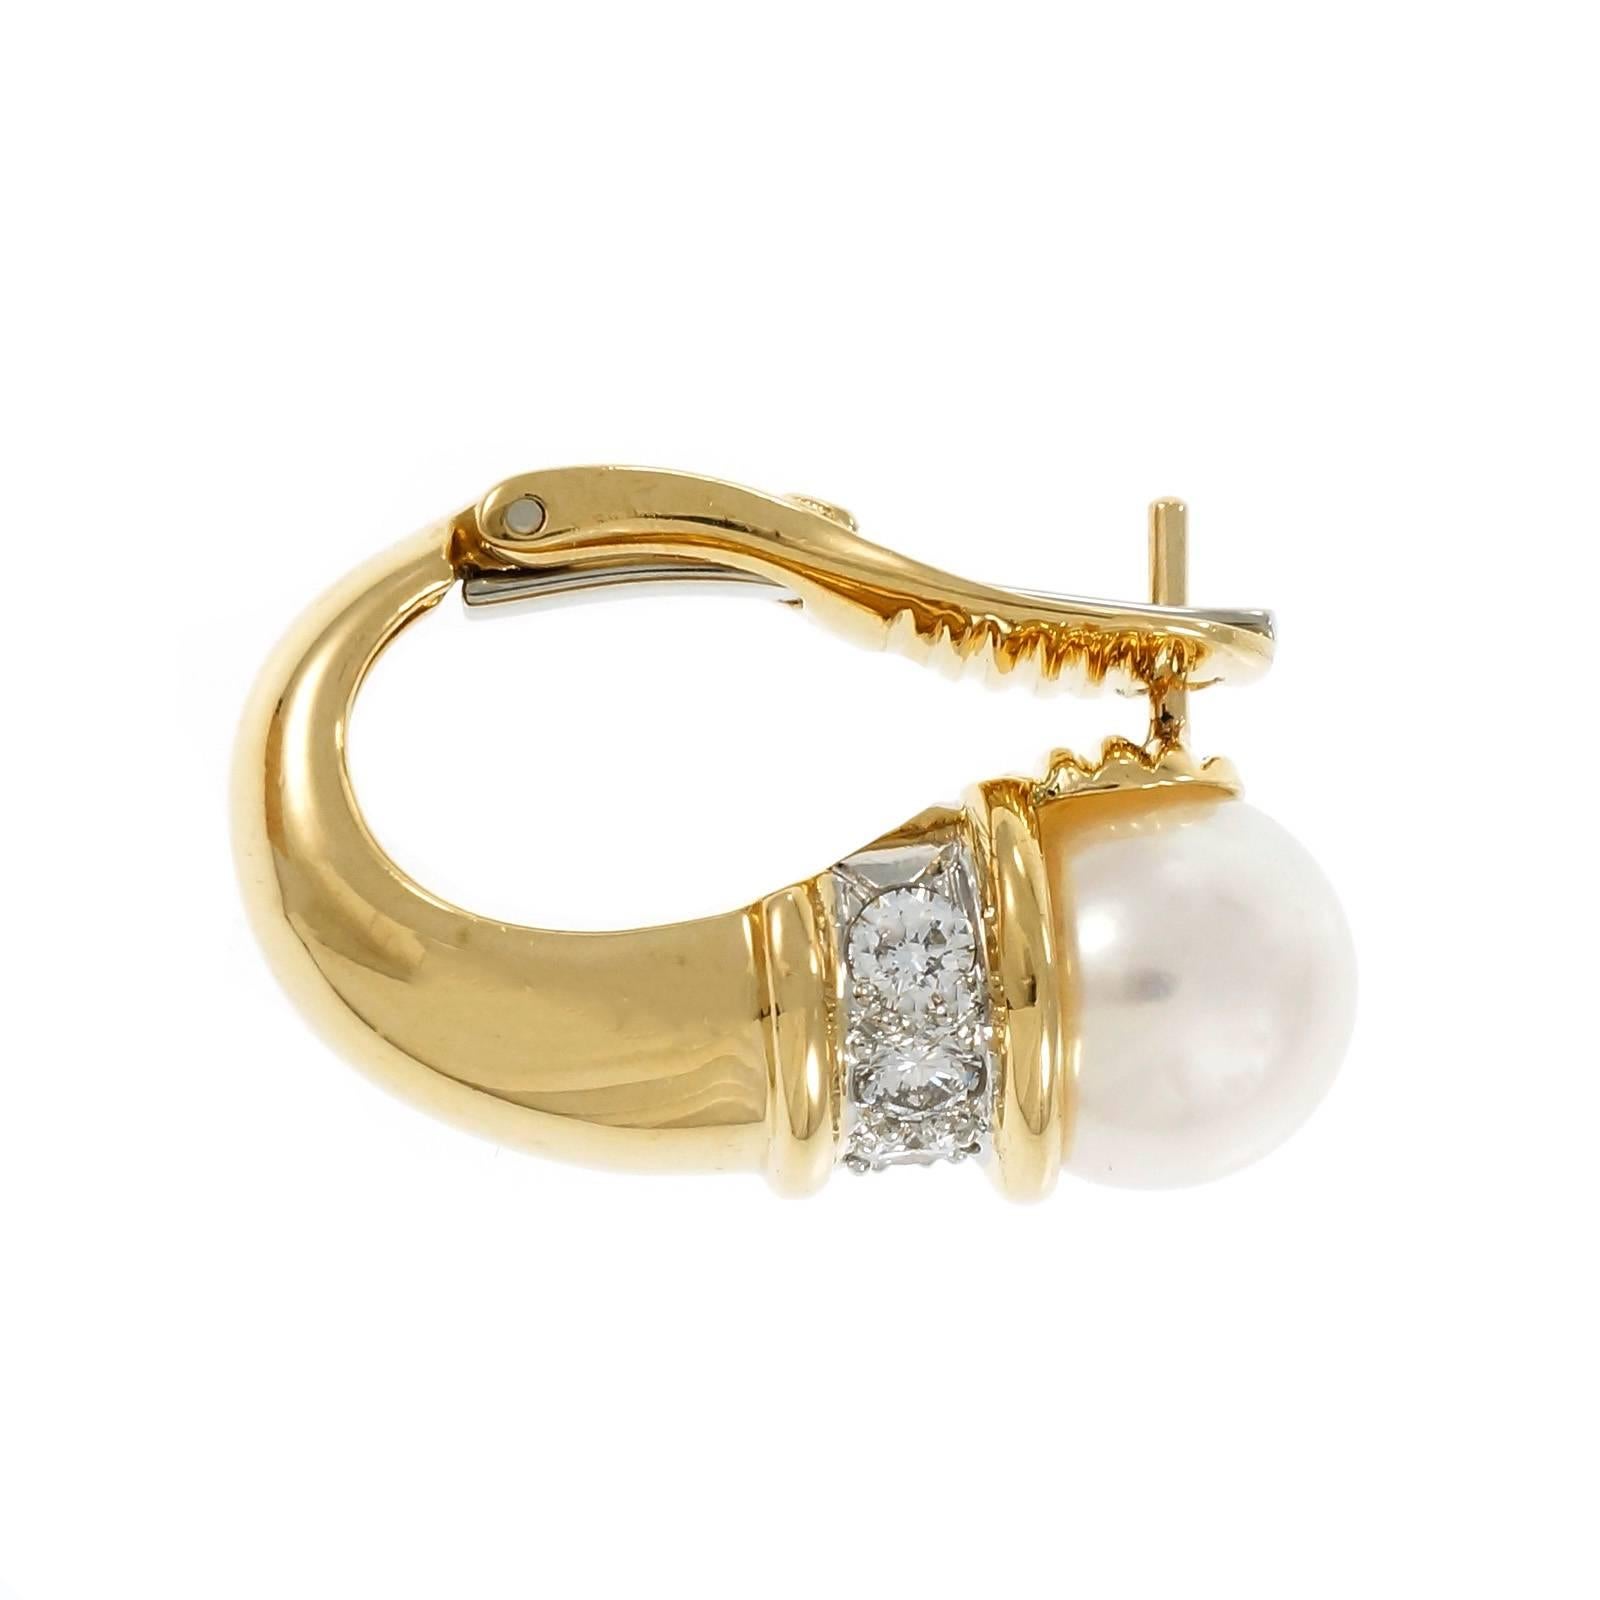 Gumps clip post 18k yellow and white gold earrings with pinkish white high lustré cultured pearls and bright sparkly full cut diamonds in a Cornucopia design hoop clip post earring.

2 round white with pink overtone cultured pearls, excellent